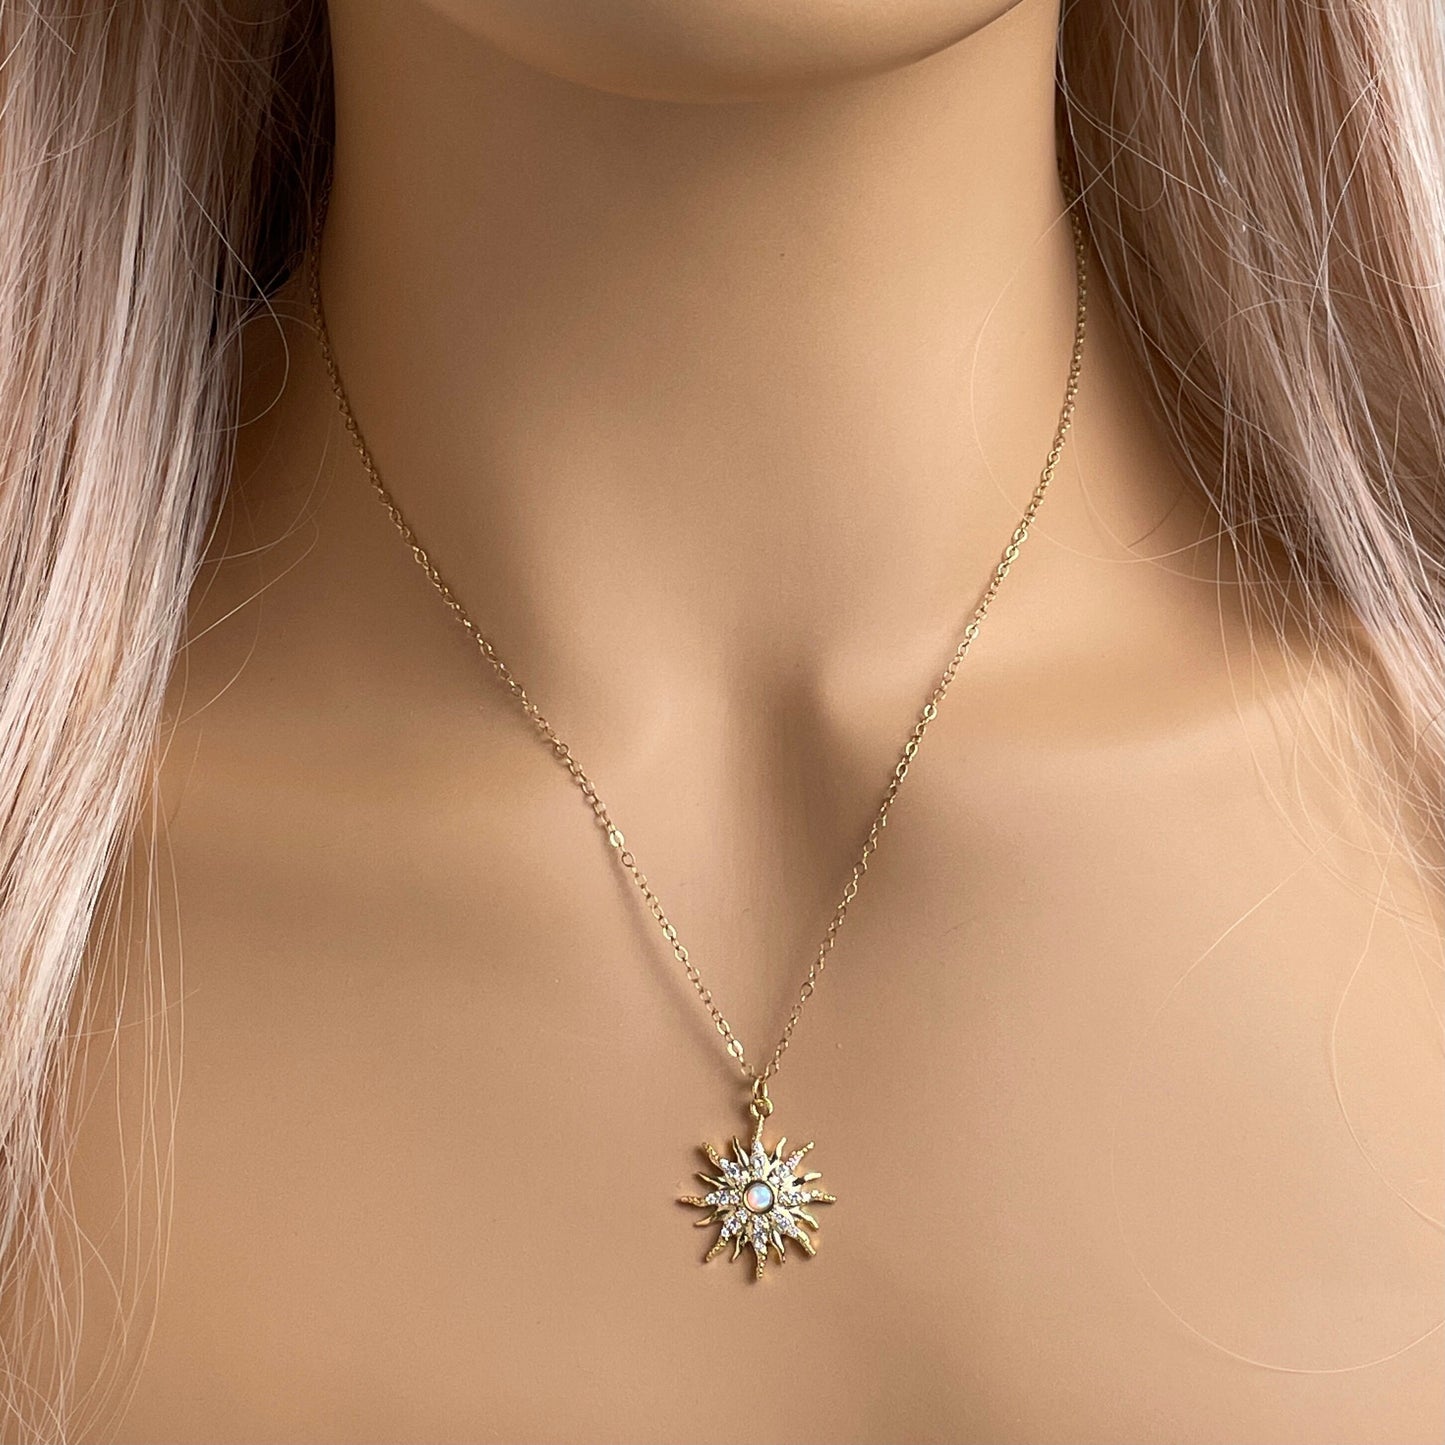 Opal Sun Necklace Gold, October Birthstone Charm, Zircon Sun Burst Pendant, Christmas Gifts For Her, M5-390